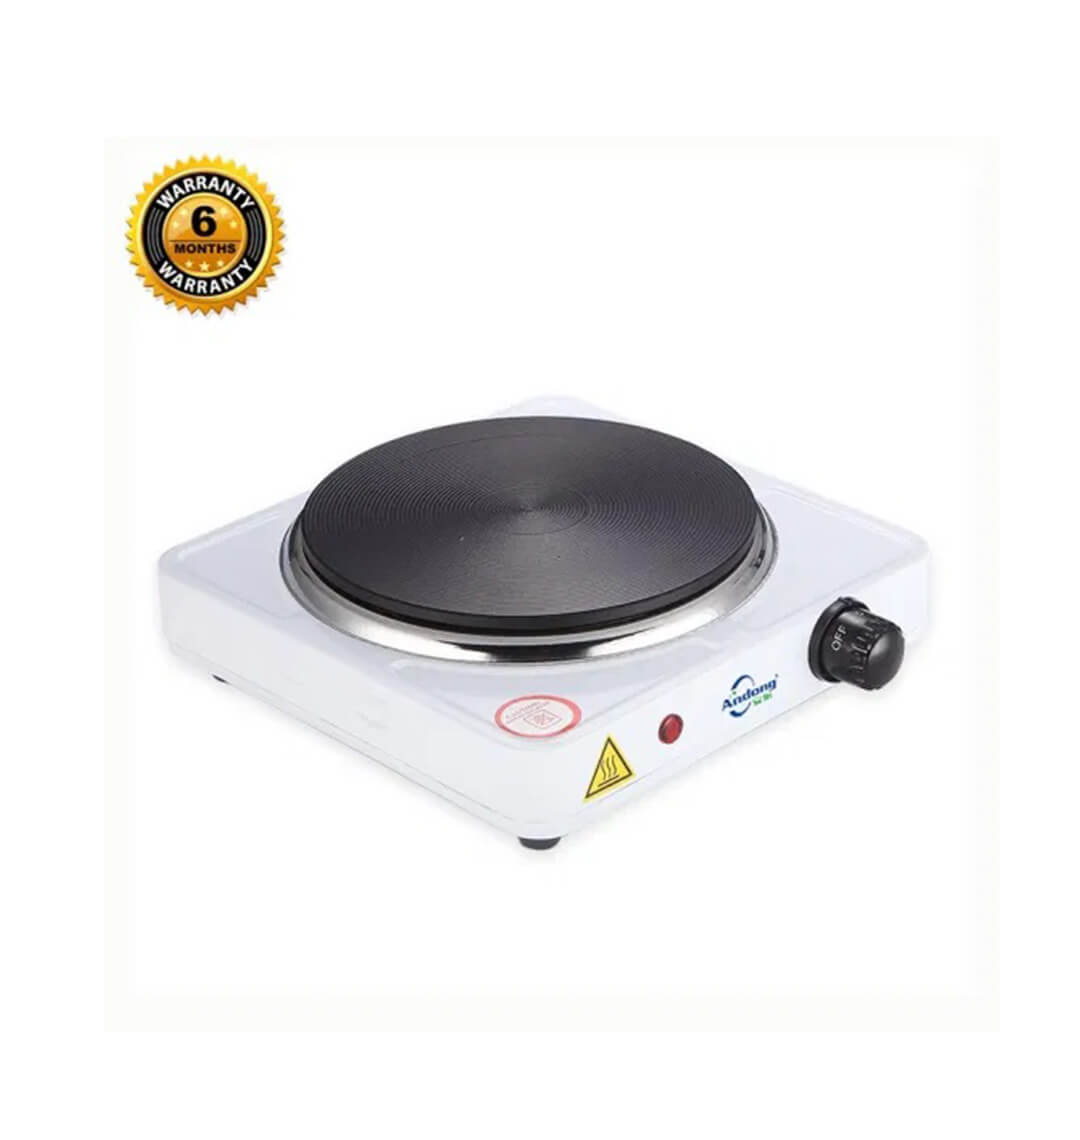 Electric Cooker 1500w (Hot Plate Cooker)